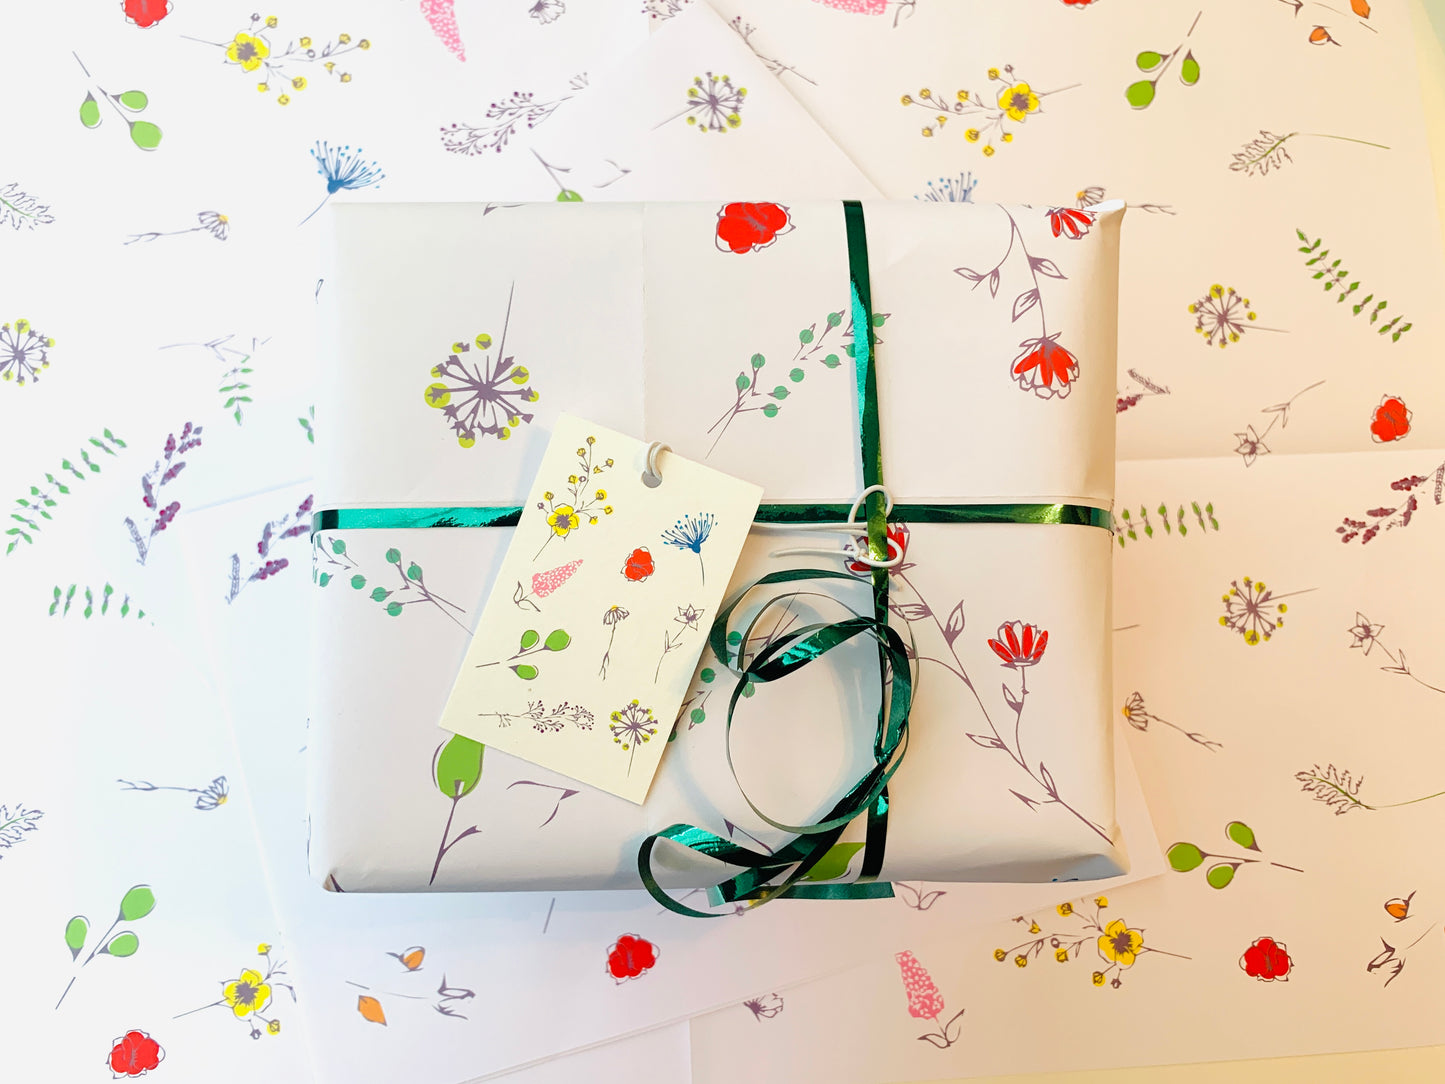 Pretty Flowers Wrapping Paper with FREE GIFT TAG